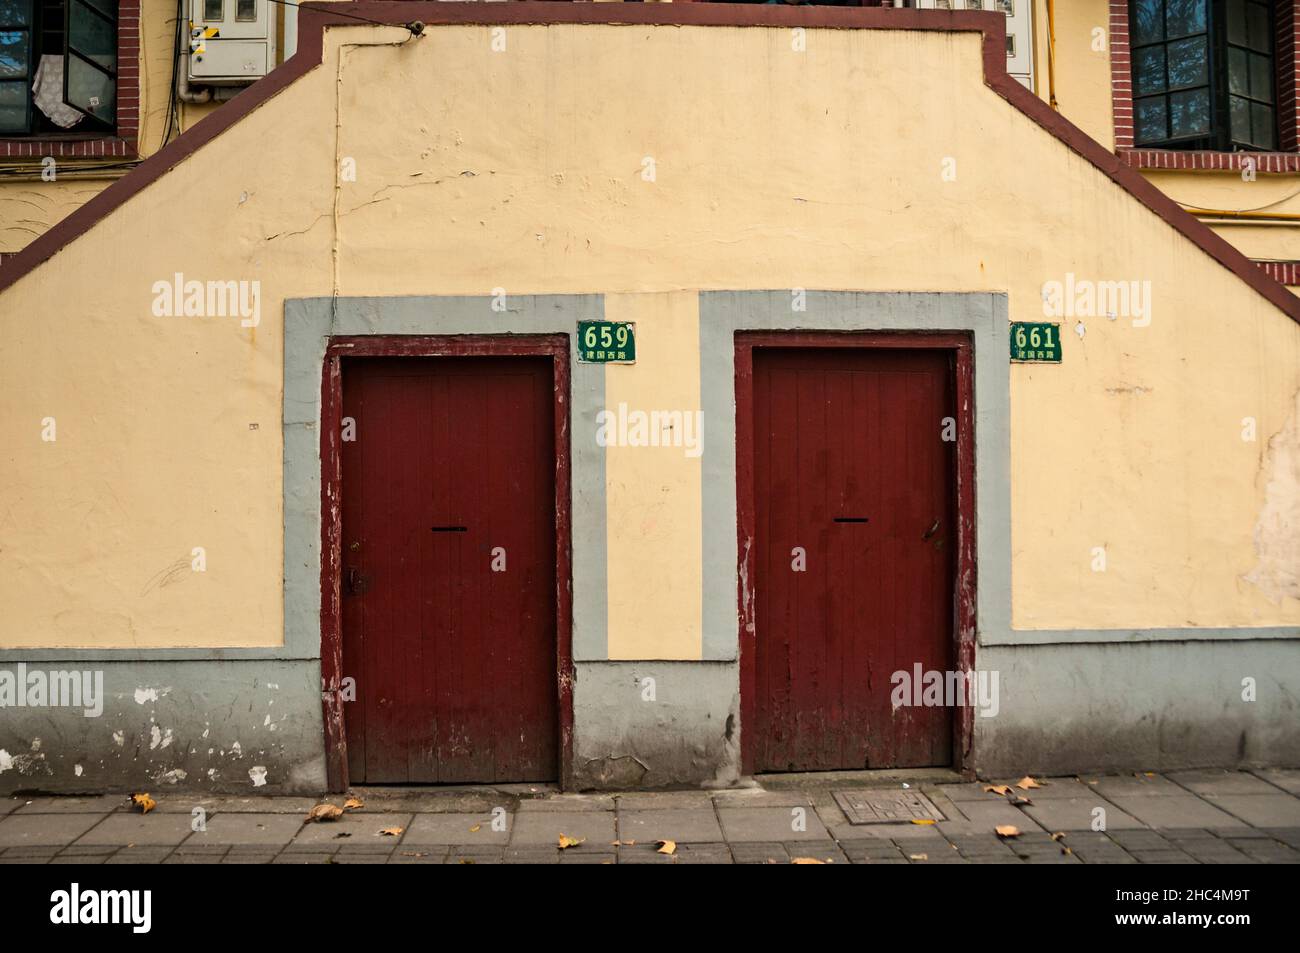 Matching doors on Jianguo Xilu in the Former French Concession, Shanghai, China. Stock Photo